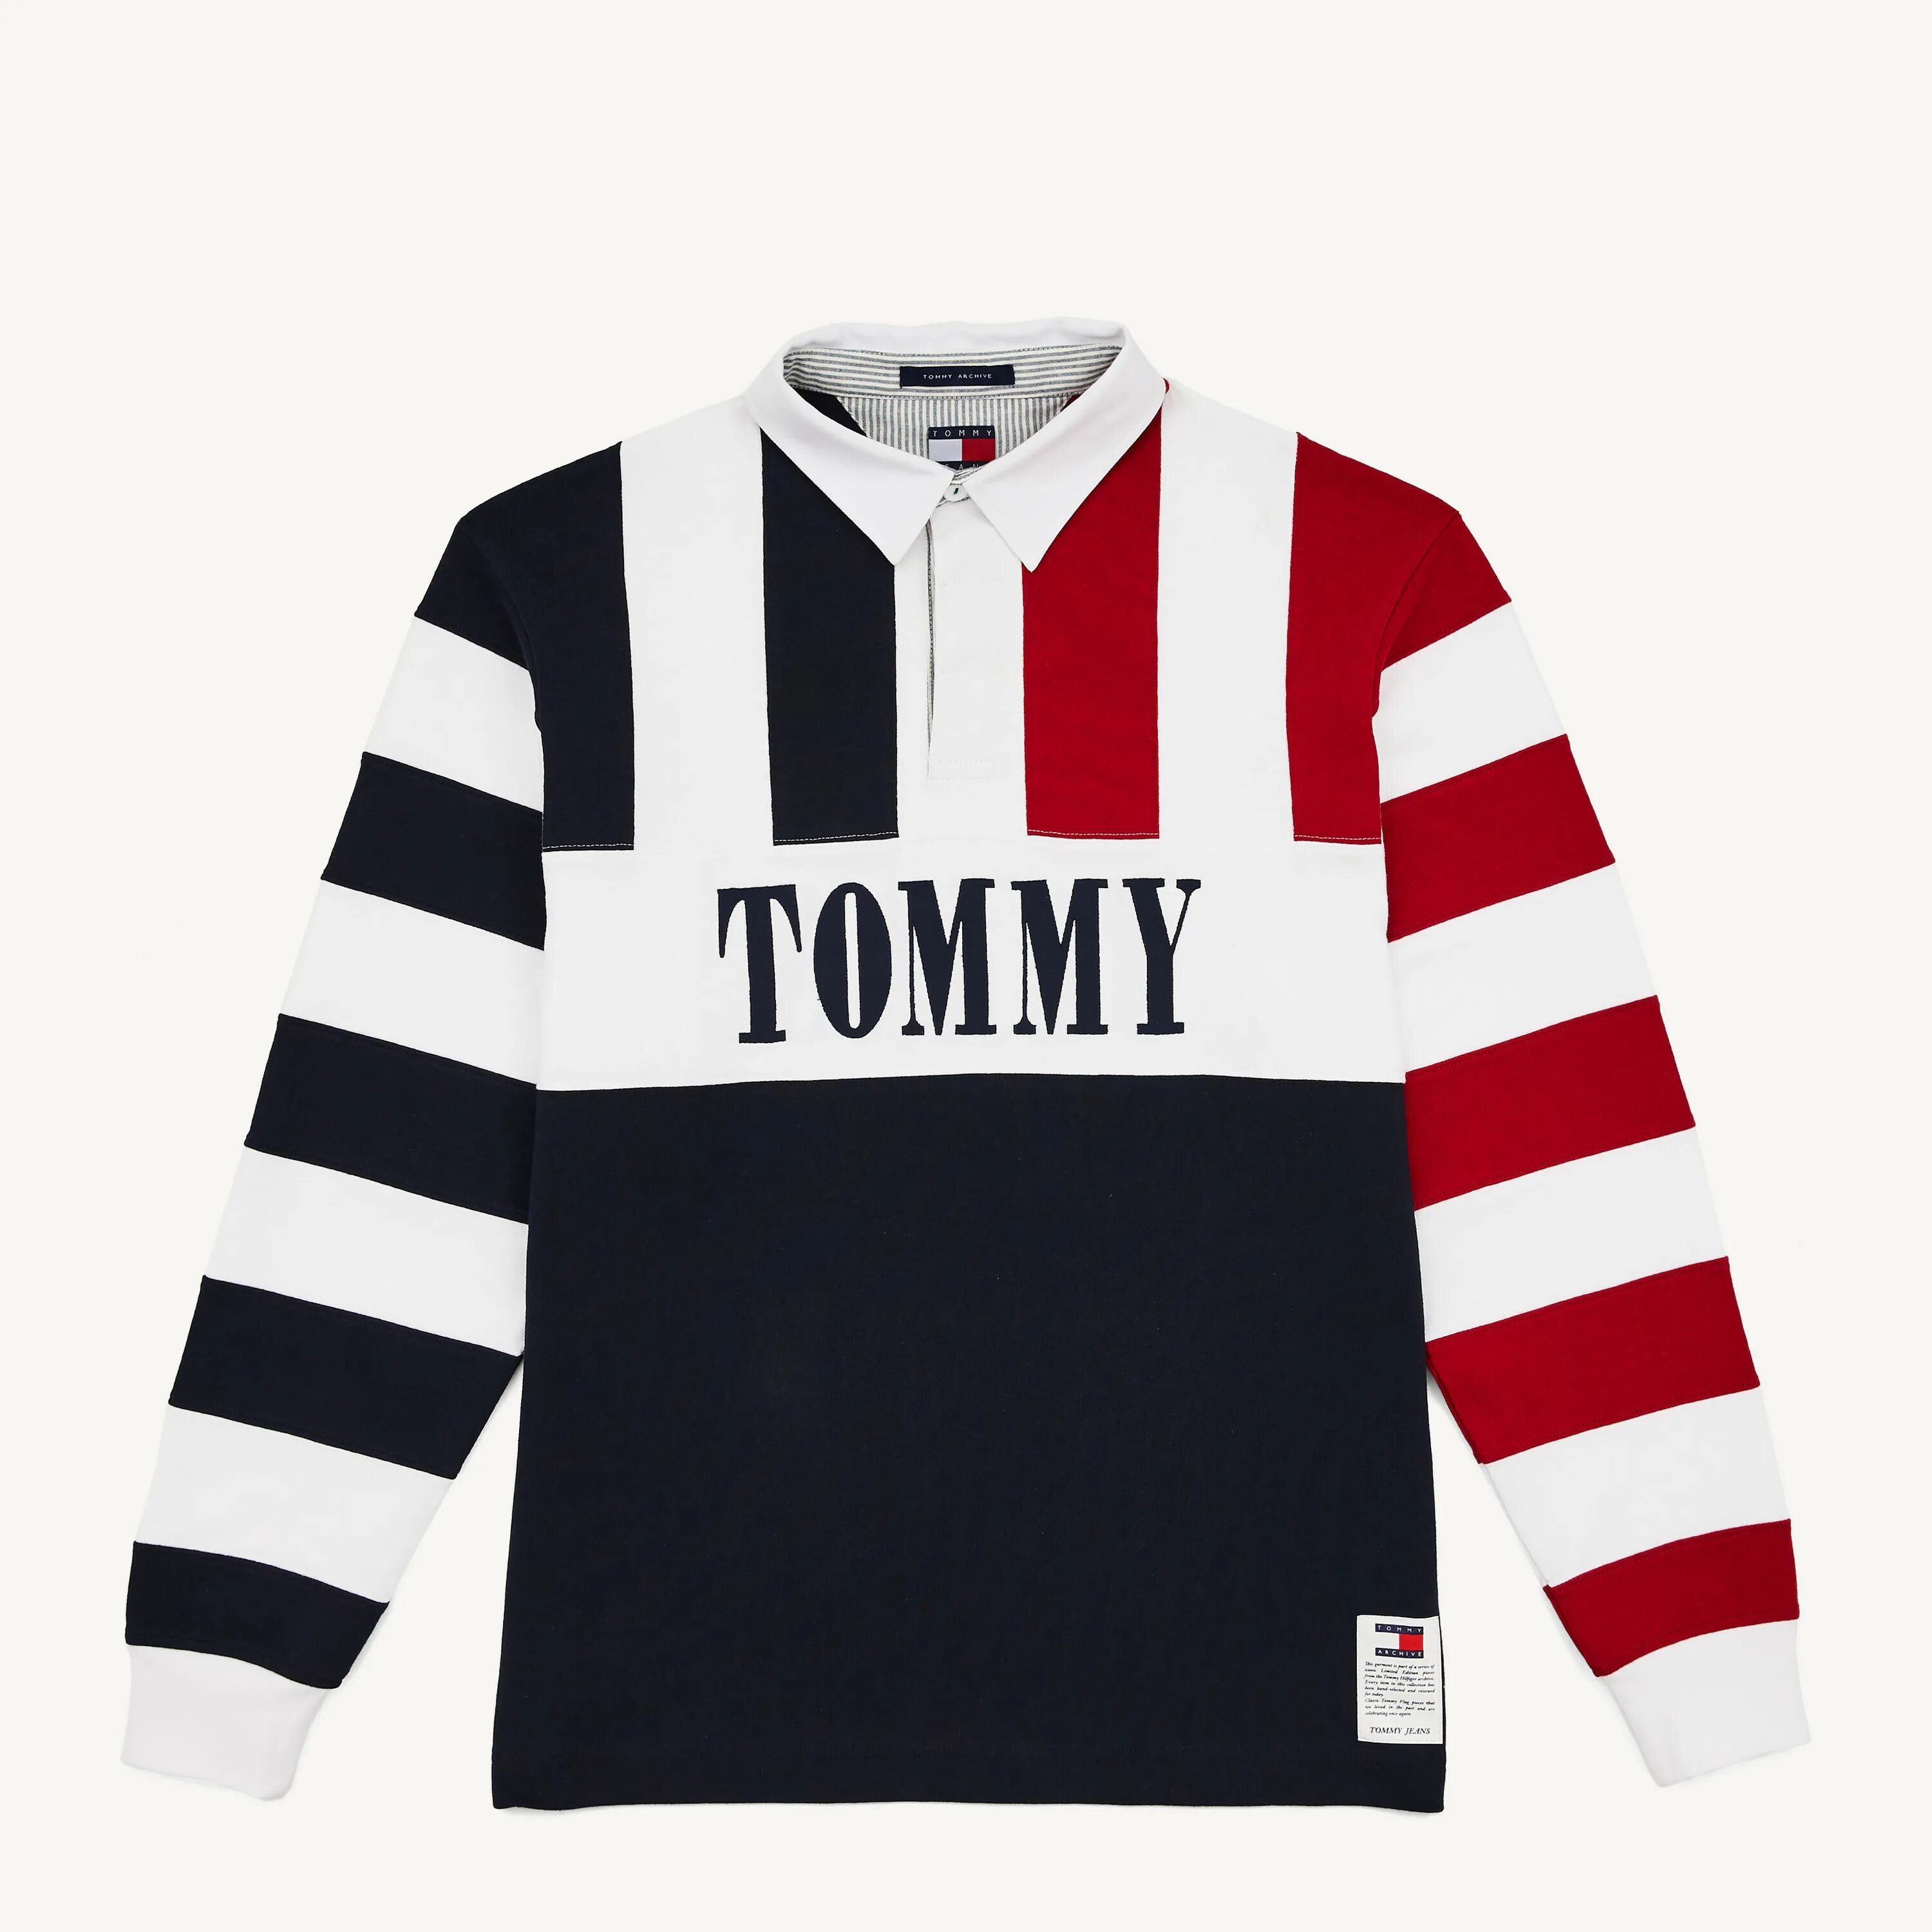 Tommy shriggly кто это. Томми Хилфигер 90s. Томми Хилфигер одежда. Tommy Jeans и Tommy Hilfiger. Tommy Hilfiger Tommy Jeans логотипы.